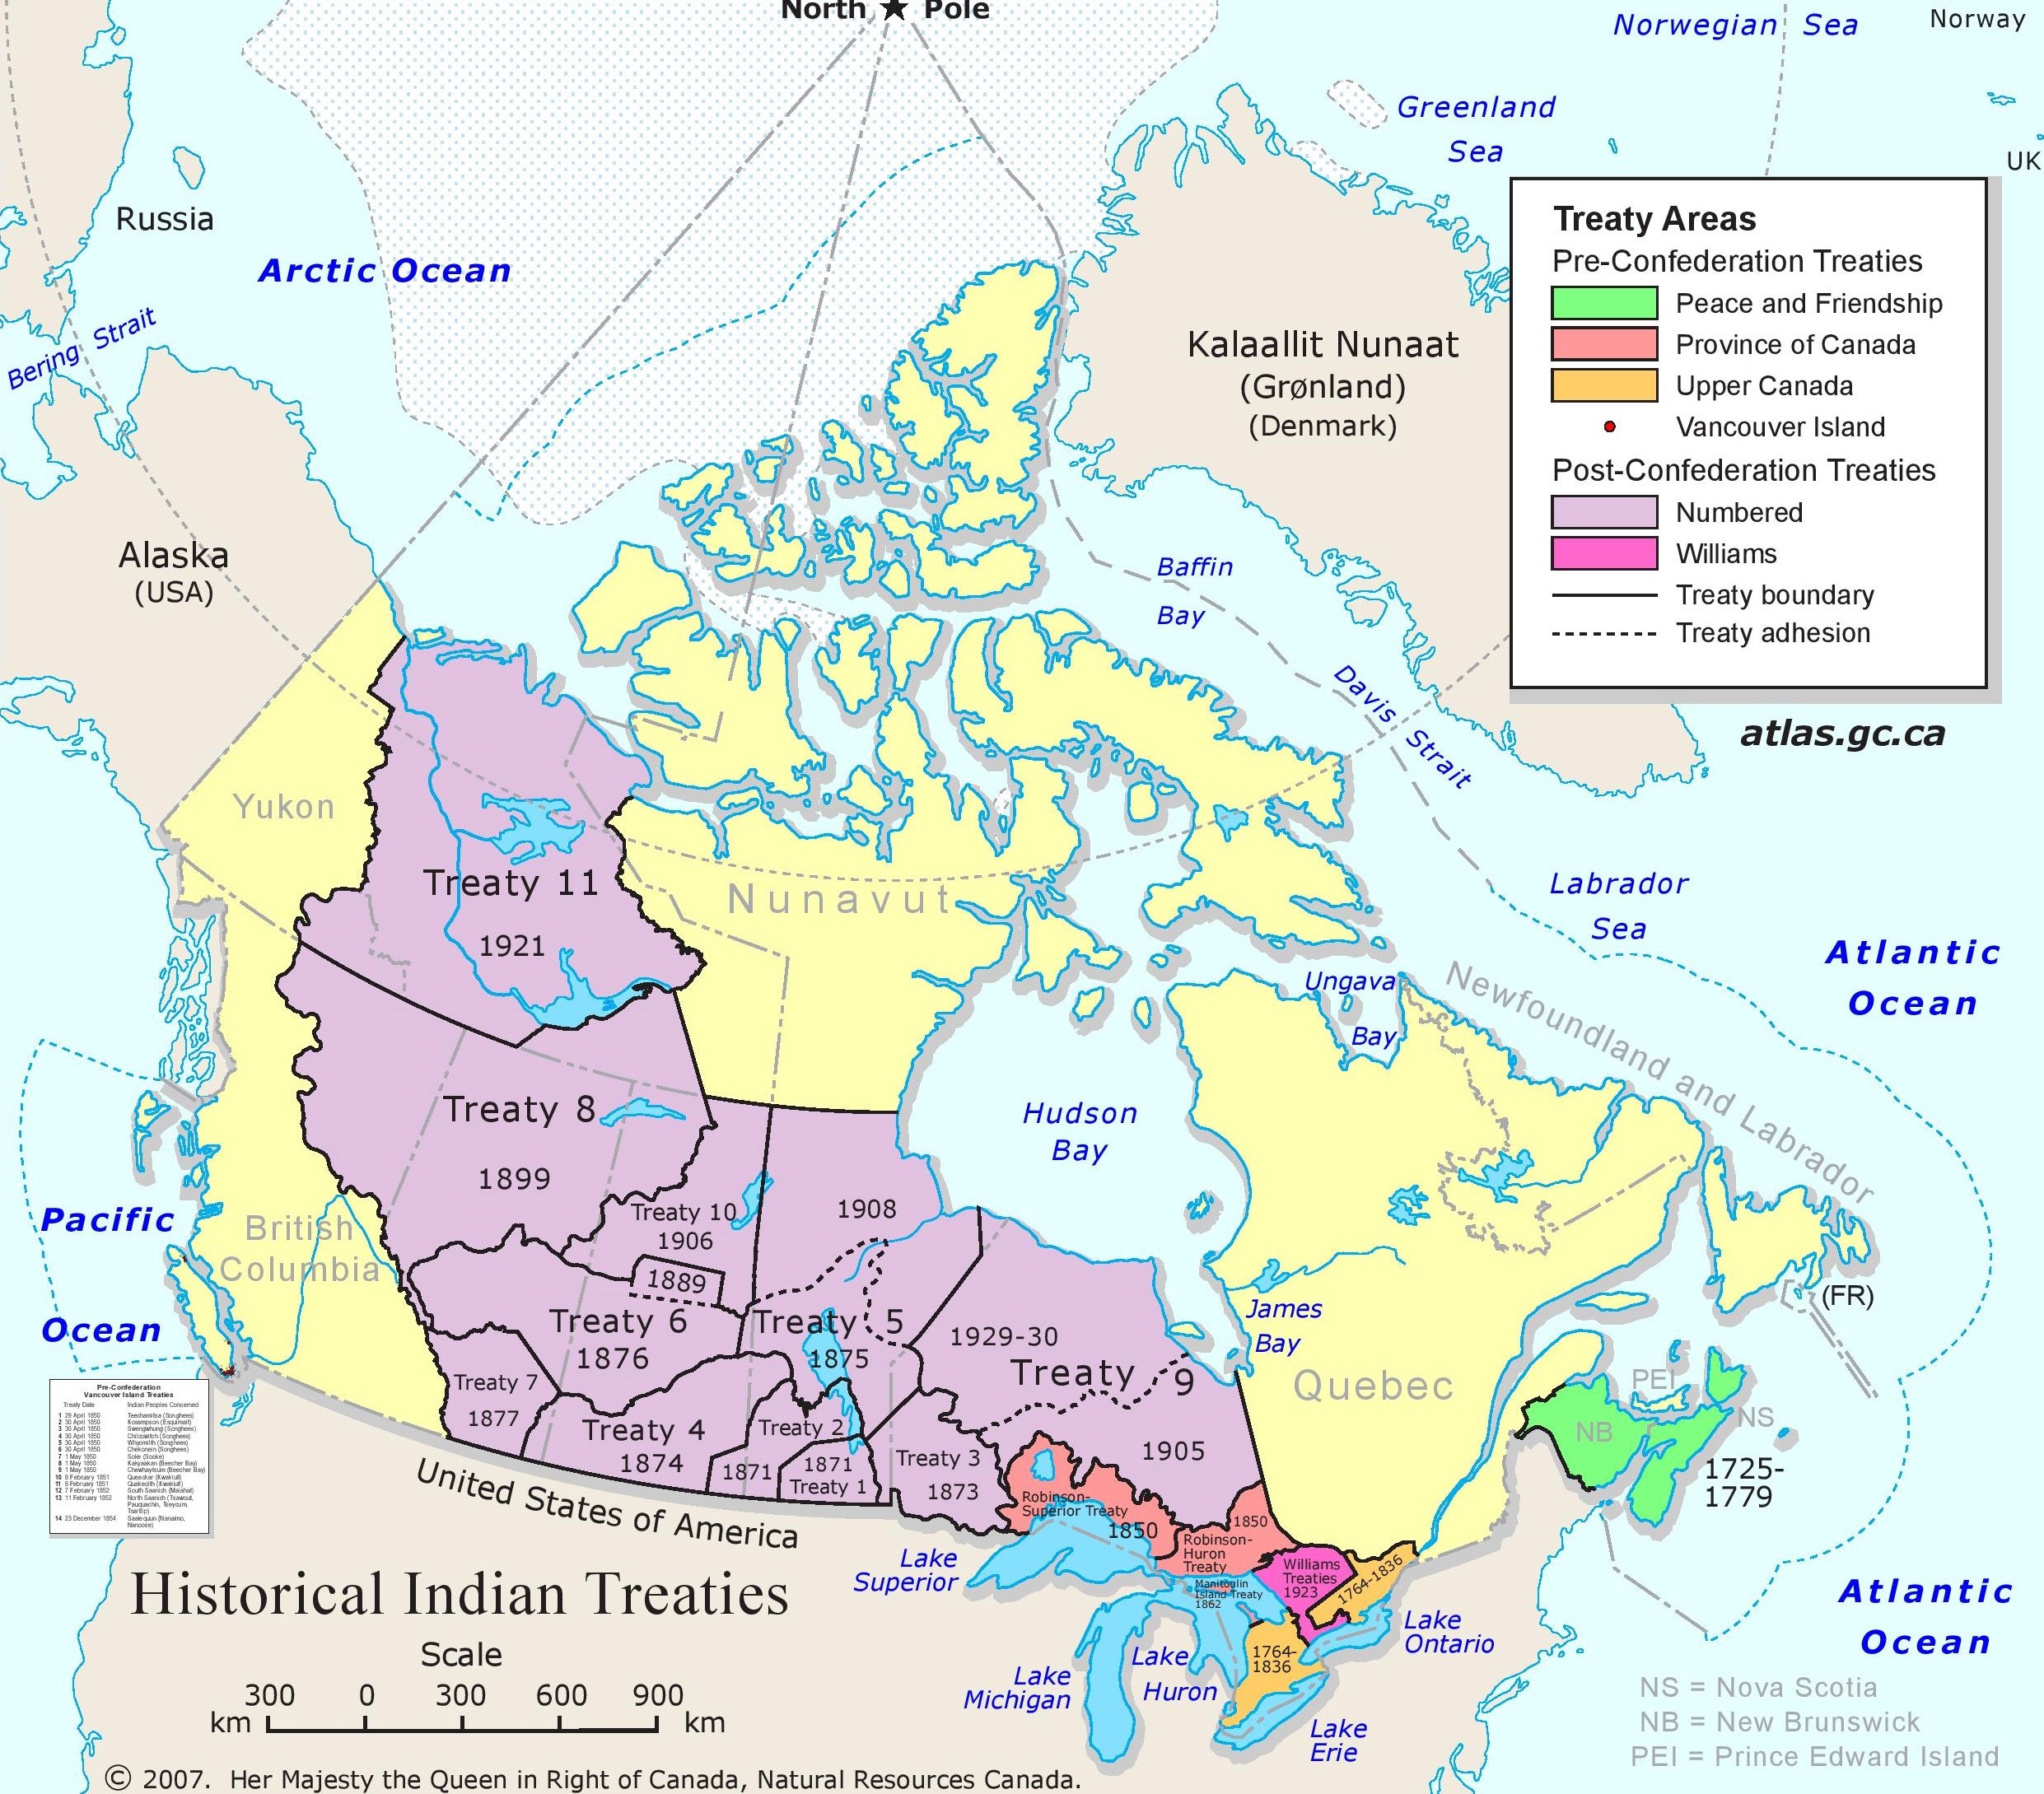 This map shows today's provincial and territorial boundaries in Canada, and the treaties that were made within them prior to 1975. Nova Scotia and New Brunswick are covered by Peace and Friendship Treaties. Ontario is covered with a patchwork of treaties, the largest by far being Treaty 9, which covers more than half of the province. Manitoba, Saskatchewan, Alberta, about half the Northwest Territories, and part of Yukon and British Columbia have numbered treaties. The areas which had no treaties prior to 1975 were Newfoundland, Quebec, the eastern part of the Northwest Territories, all the Arctic islands, most of the Yukon, and most of British Columbia.